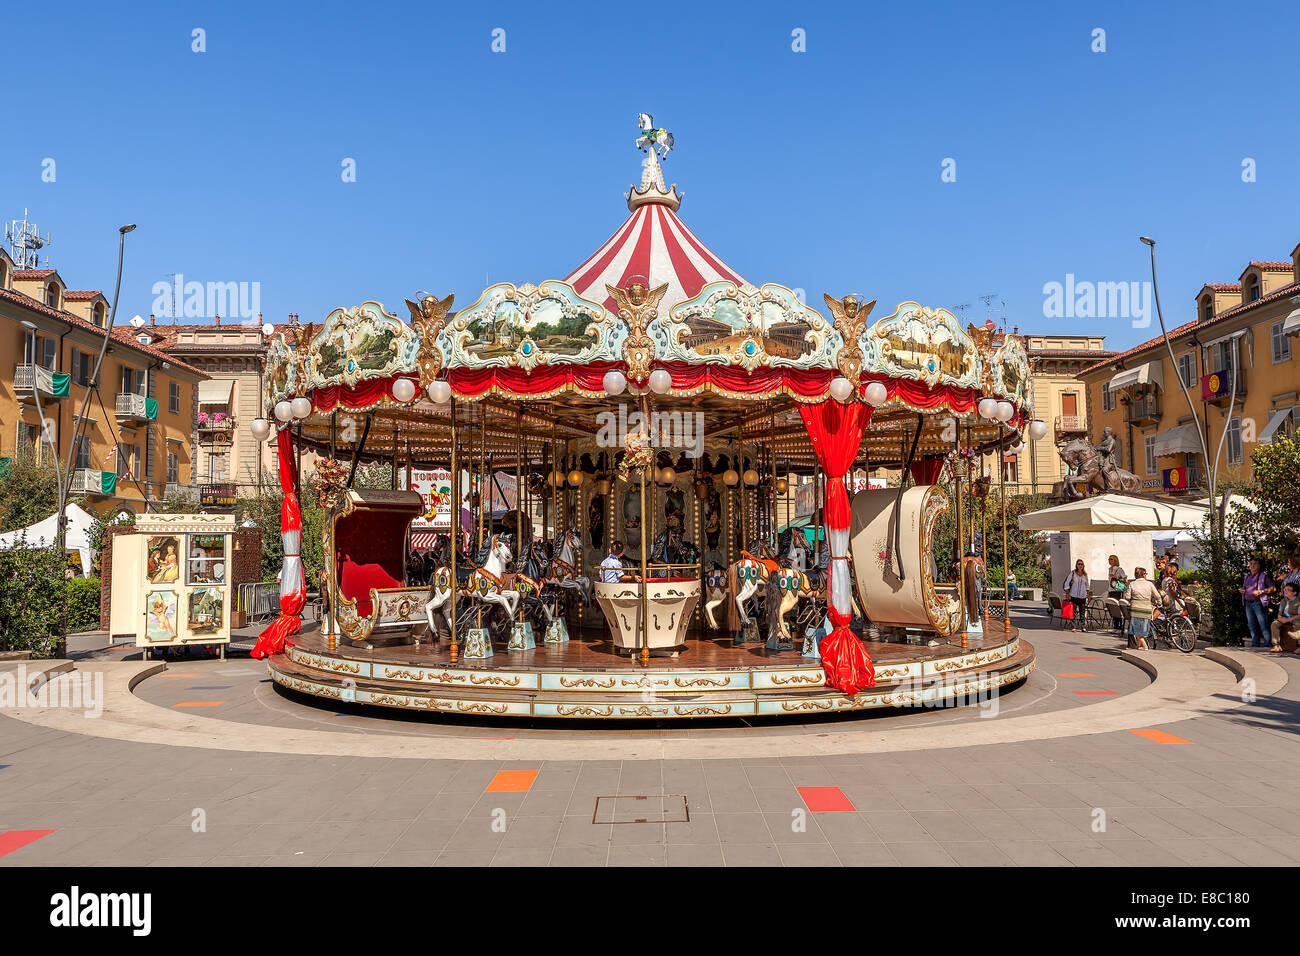 Carousel on town square in Alba, Italy. Stock Photo